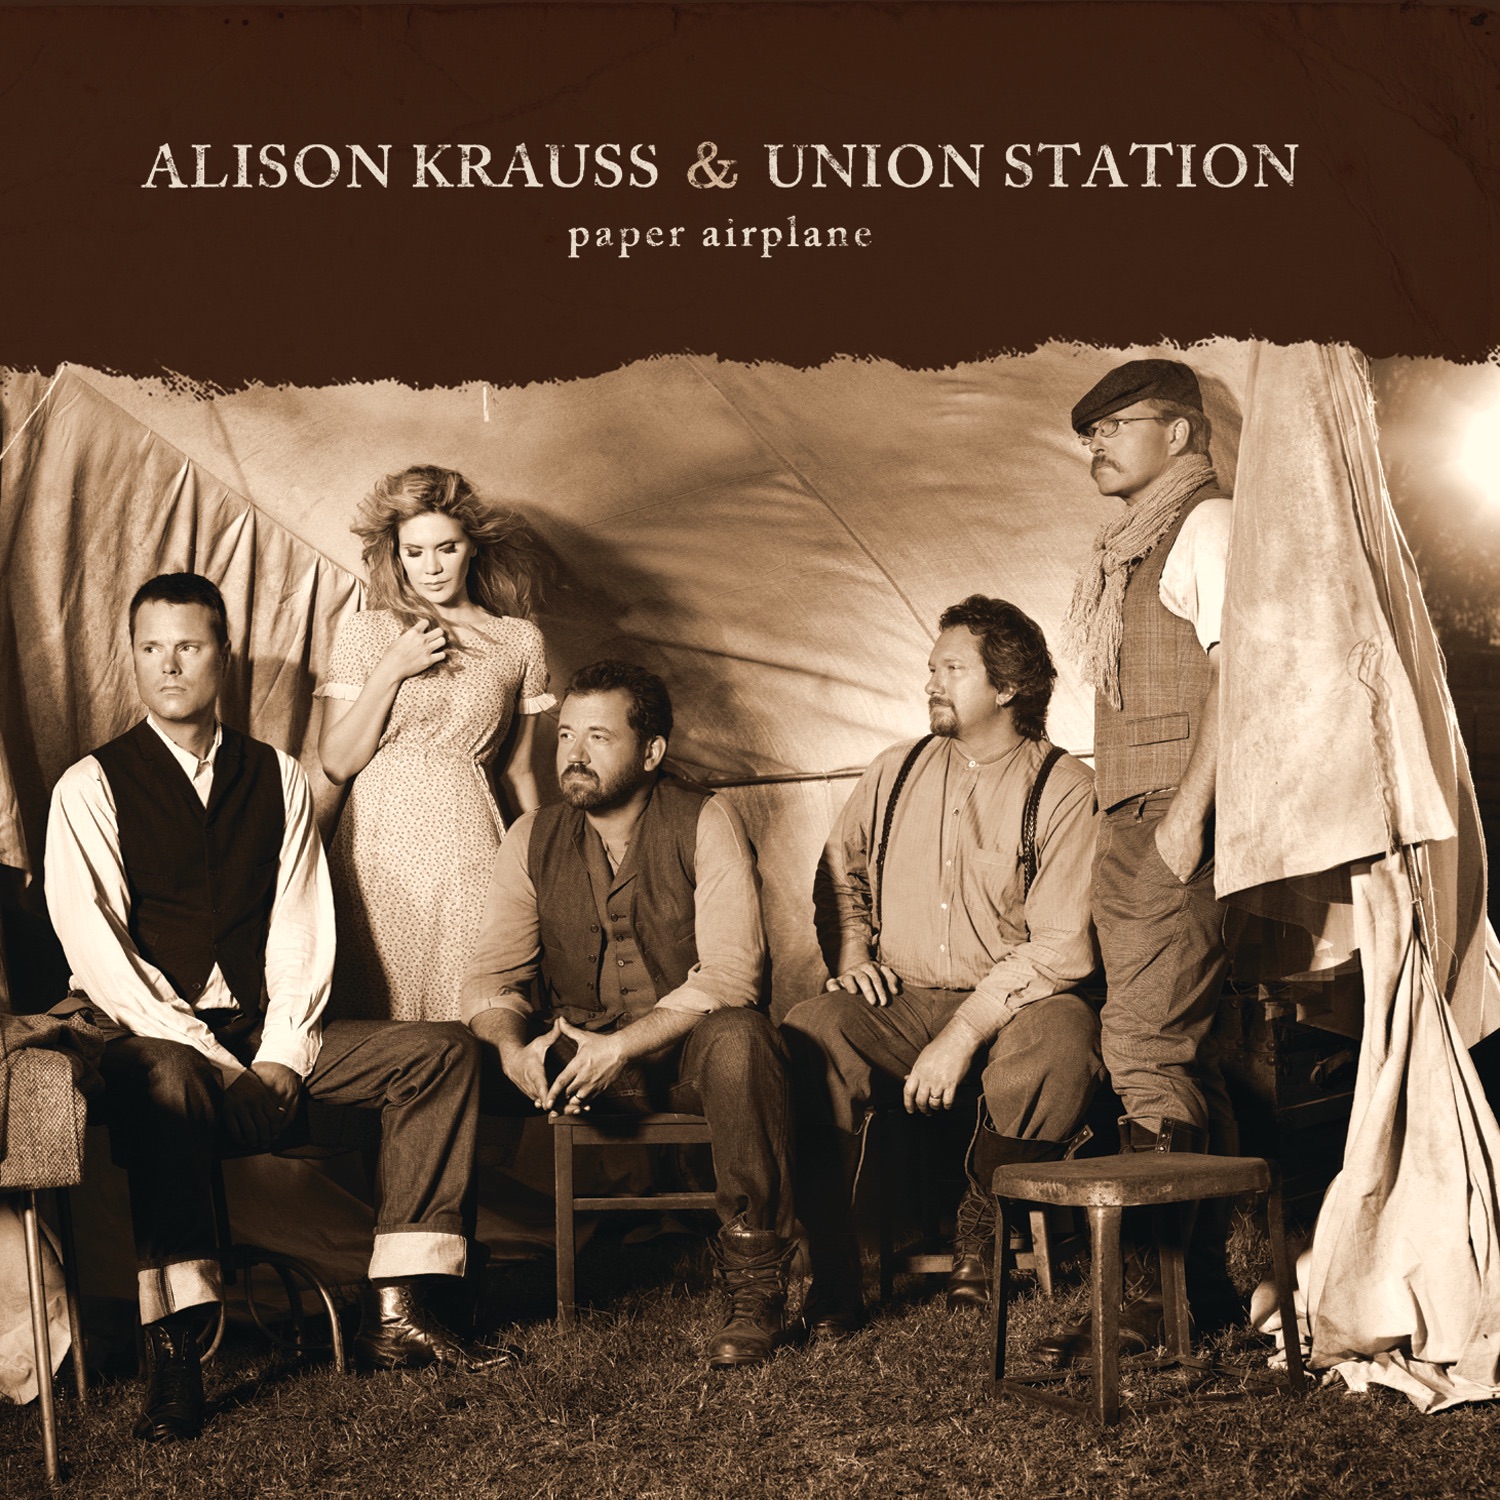 Art for My Love Follows You Where You Go by Alison Krauss & Union Station